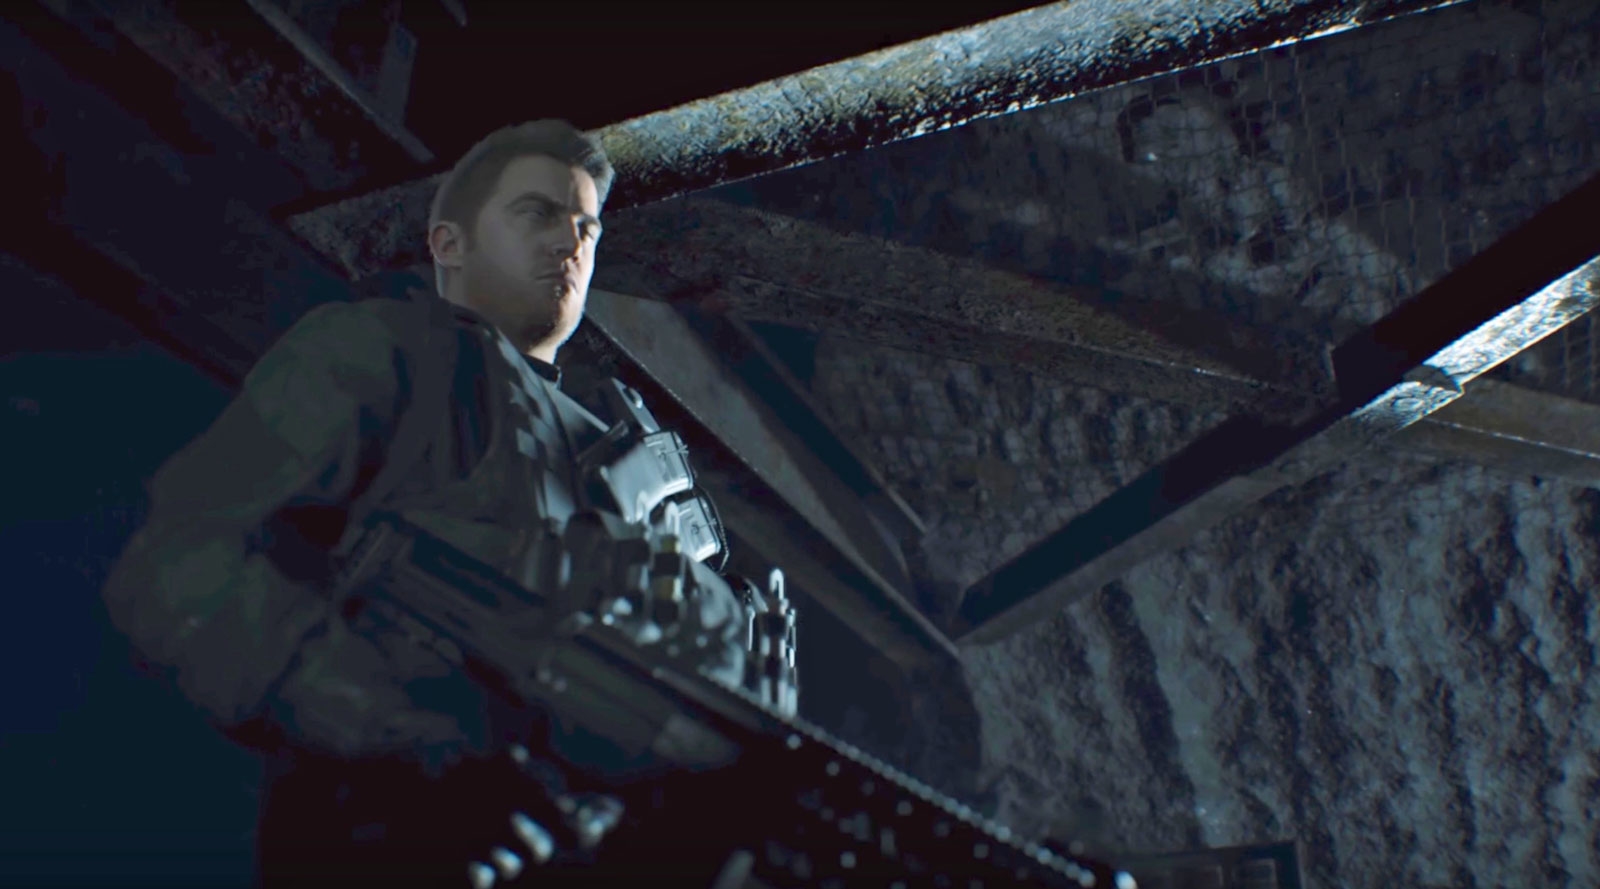 'Resident Evil 7' DLC trailer offers the first look at Chris Redfield | DeviceDaily.com